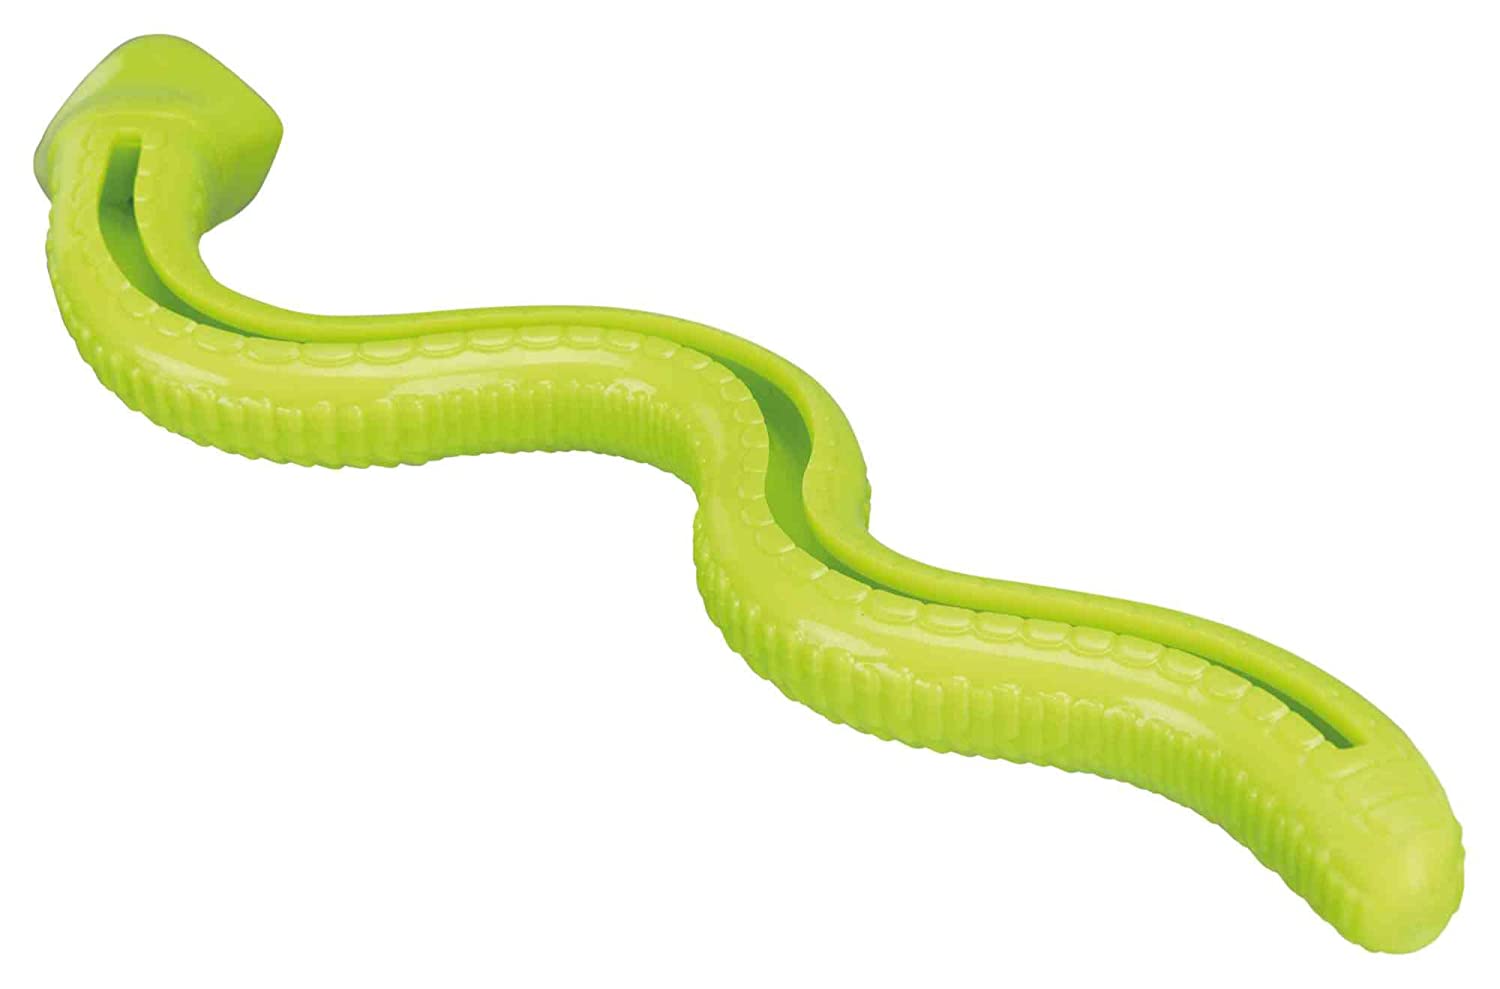 TRIXIE Snack Thermoplastic Rubber Snake Pet Toy -42 cm